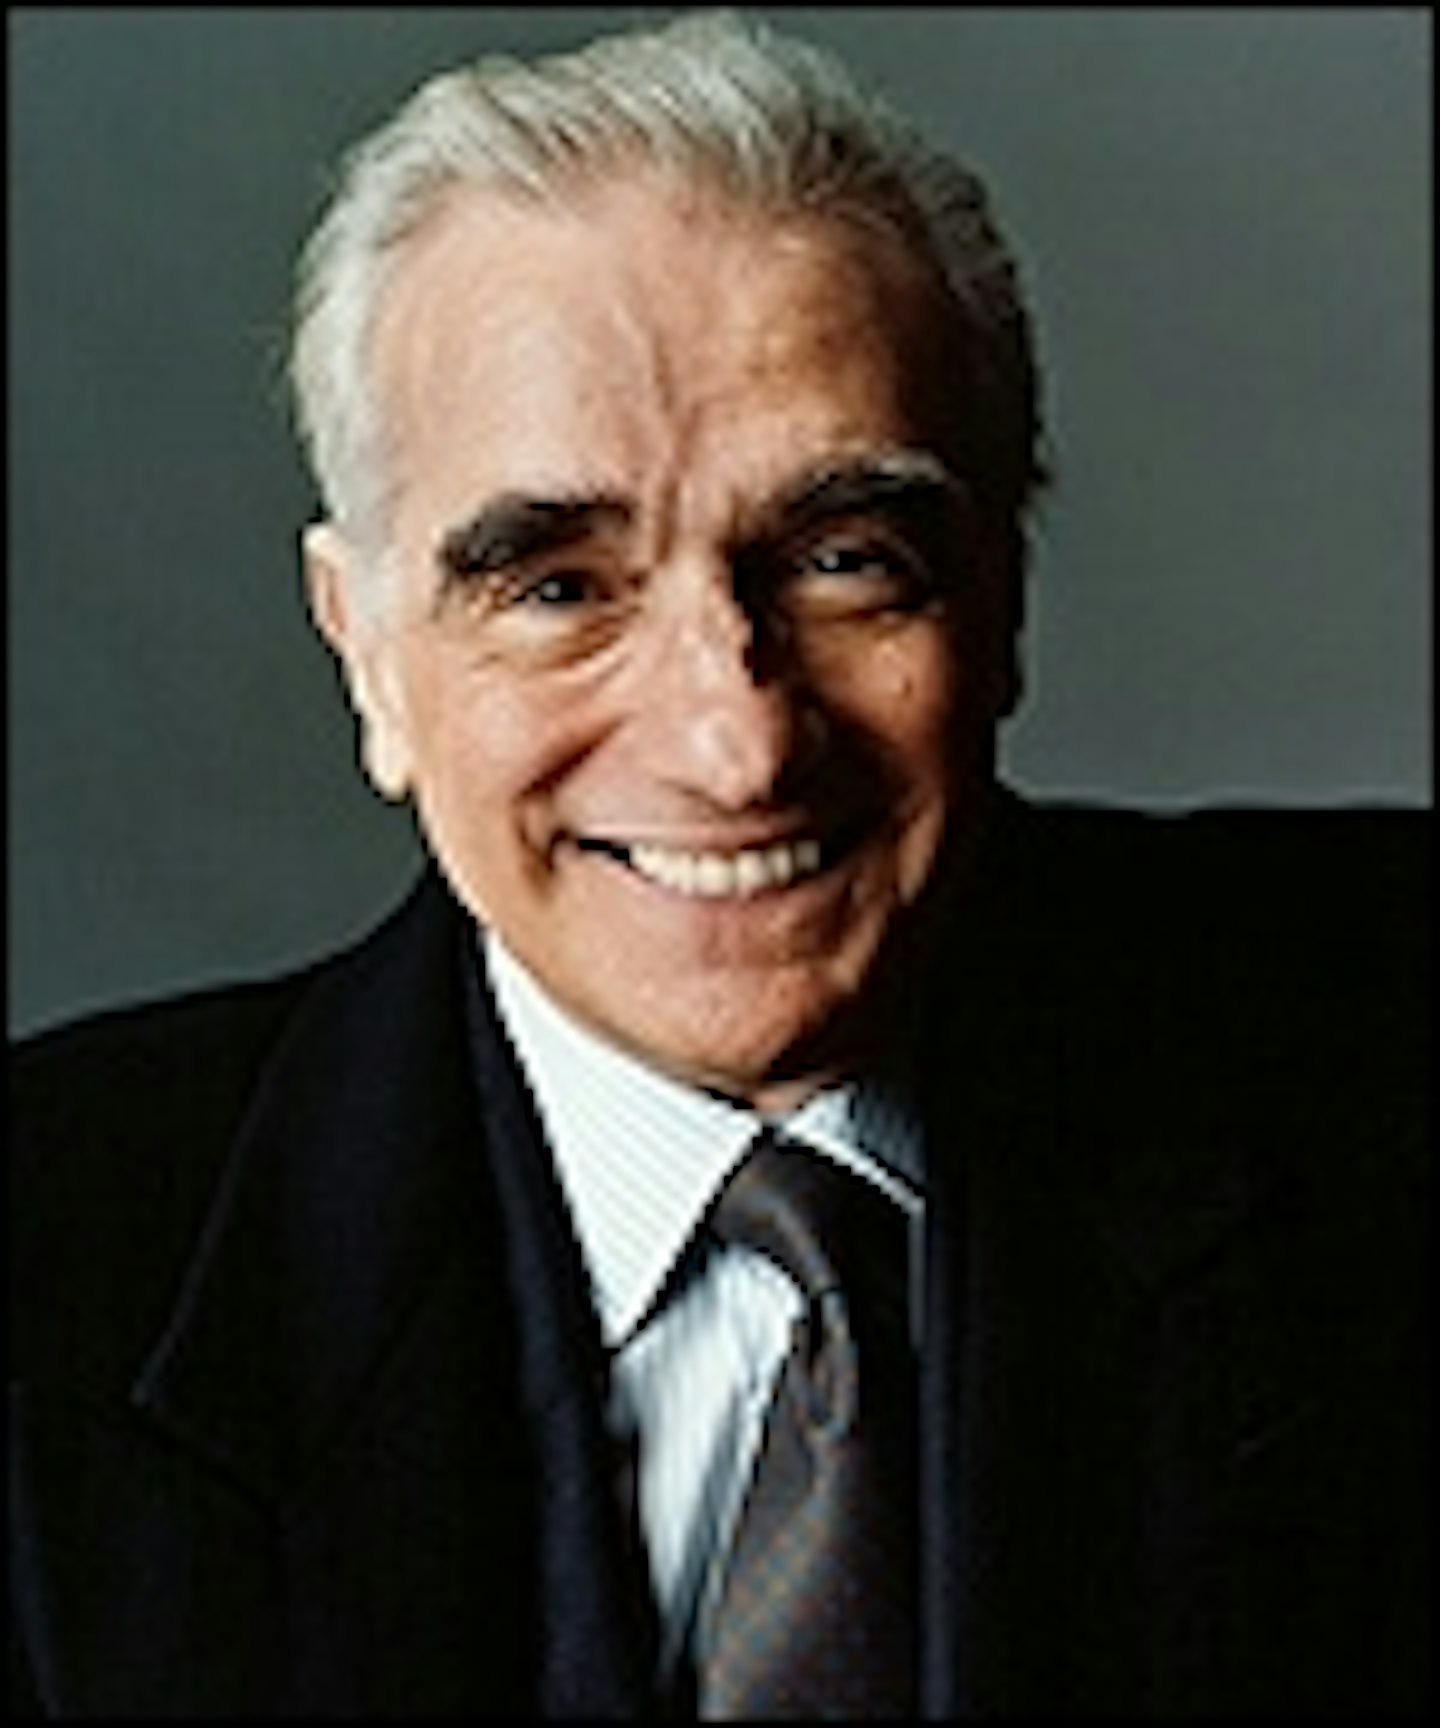 Scorsese Secures The Finance For Silence